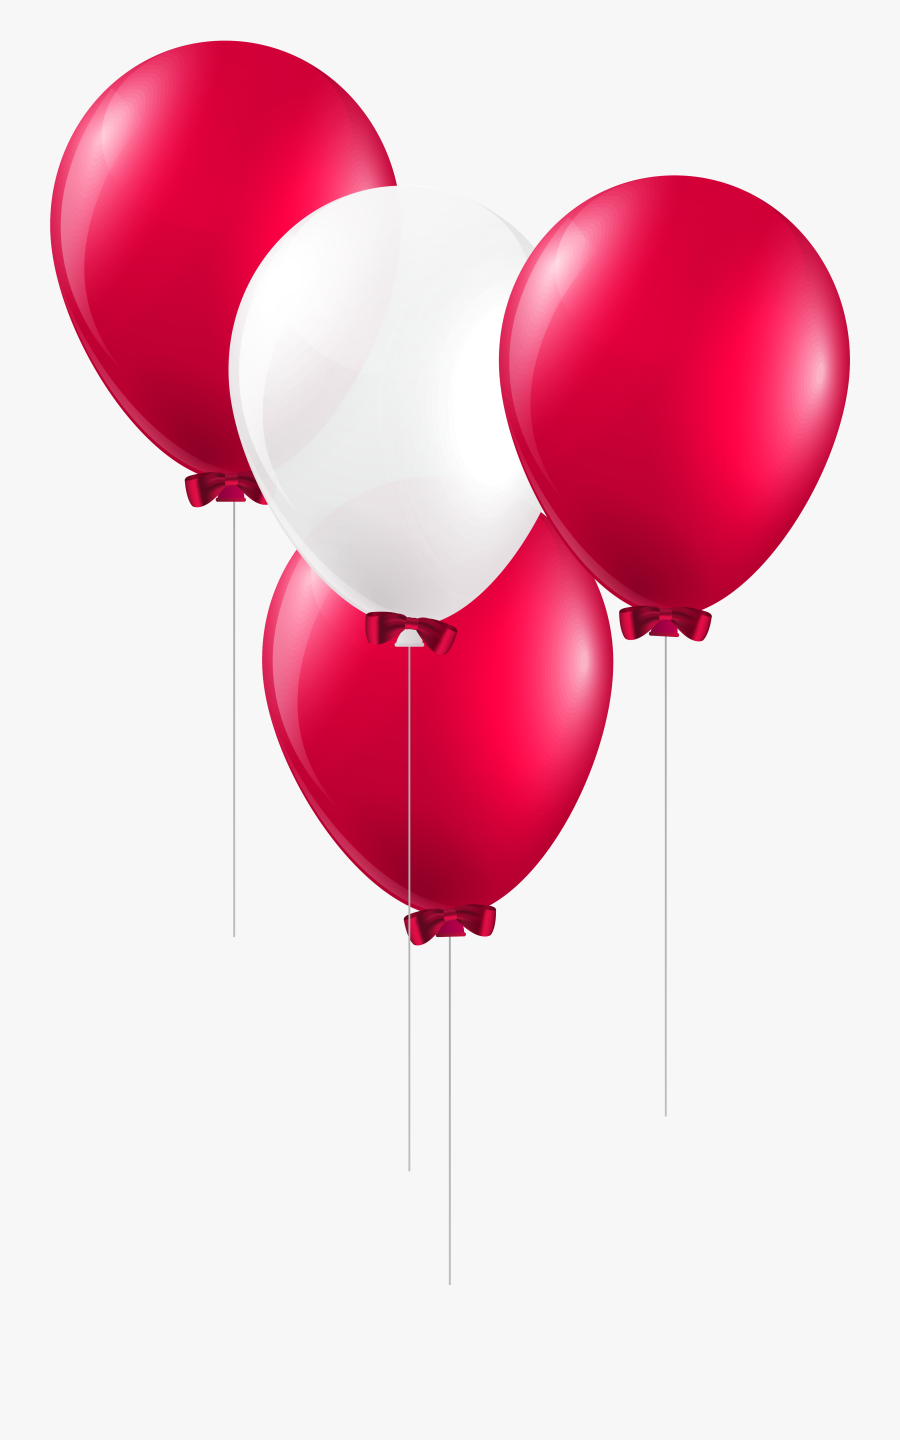 Red And White Balloons Png Clip Art Image - Red And White Balloons Transparent, Transparent Clipart